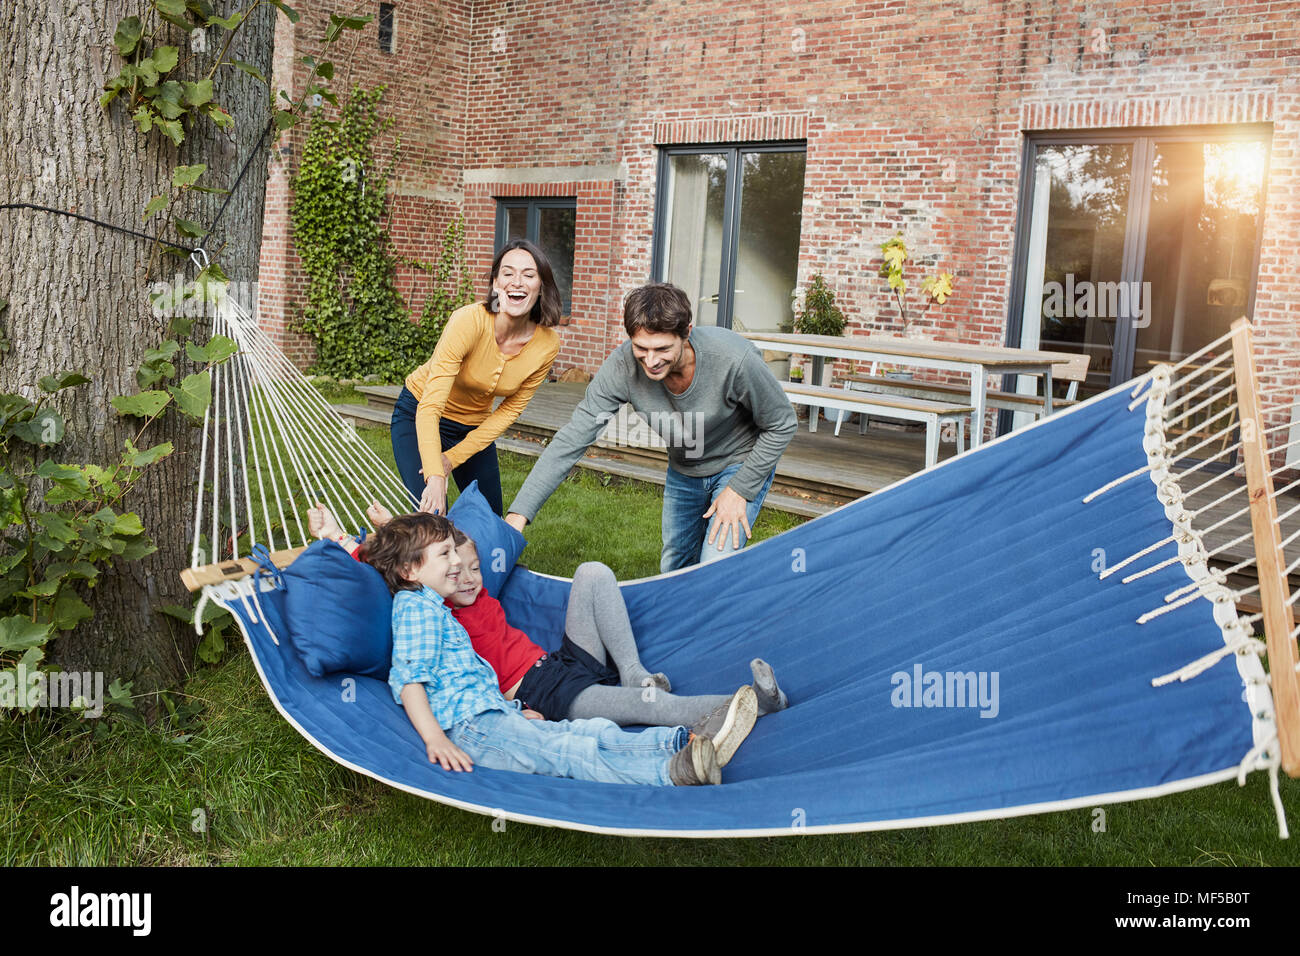 Happy family playing in hammock in garden of their home Stock Photo